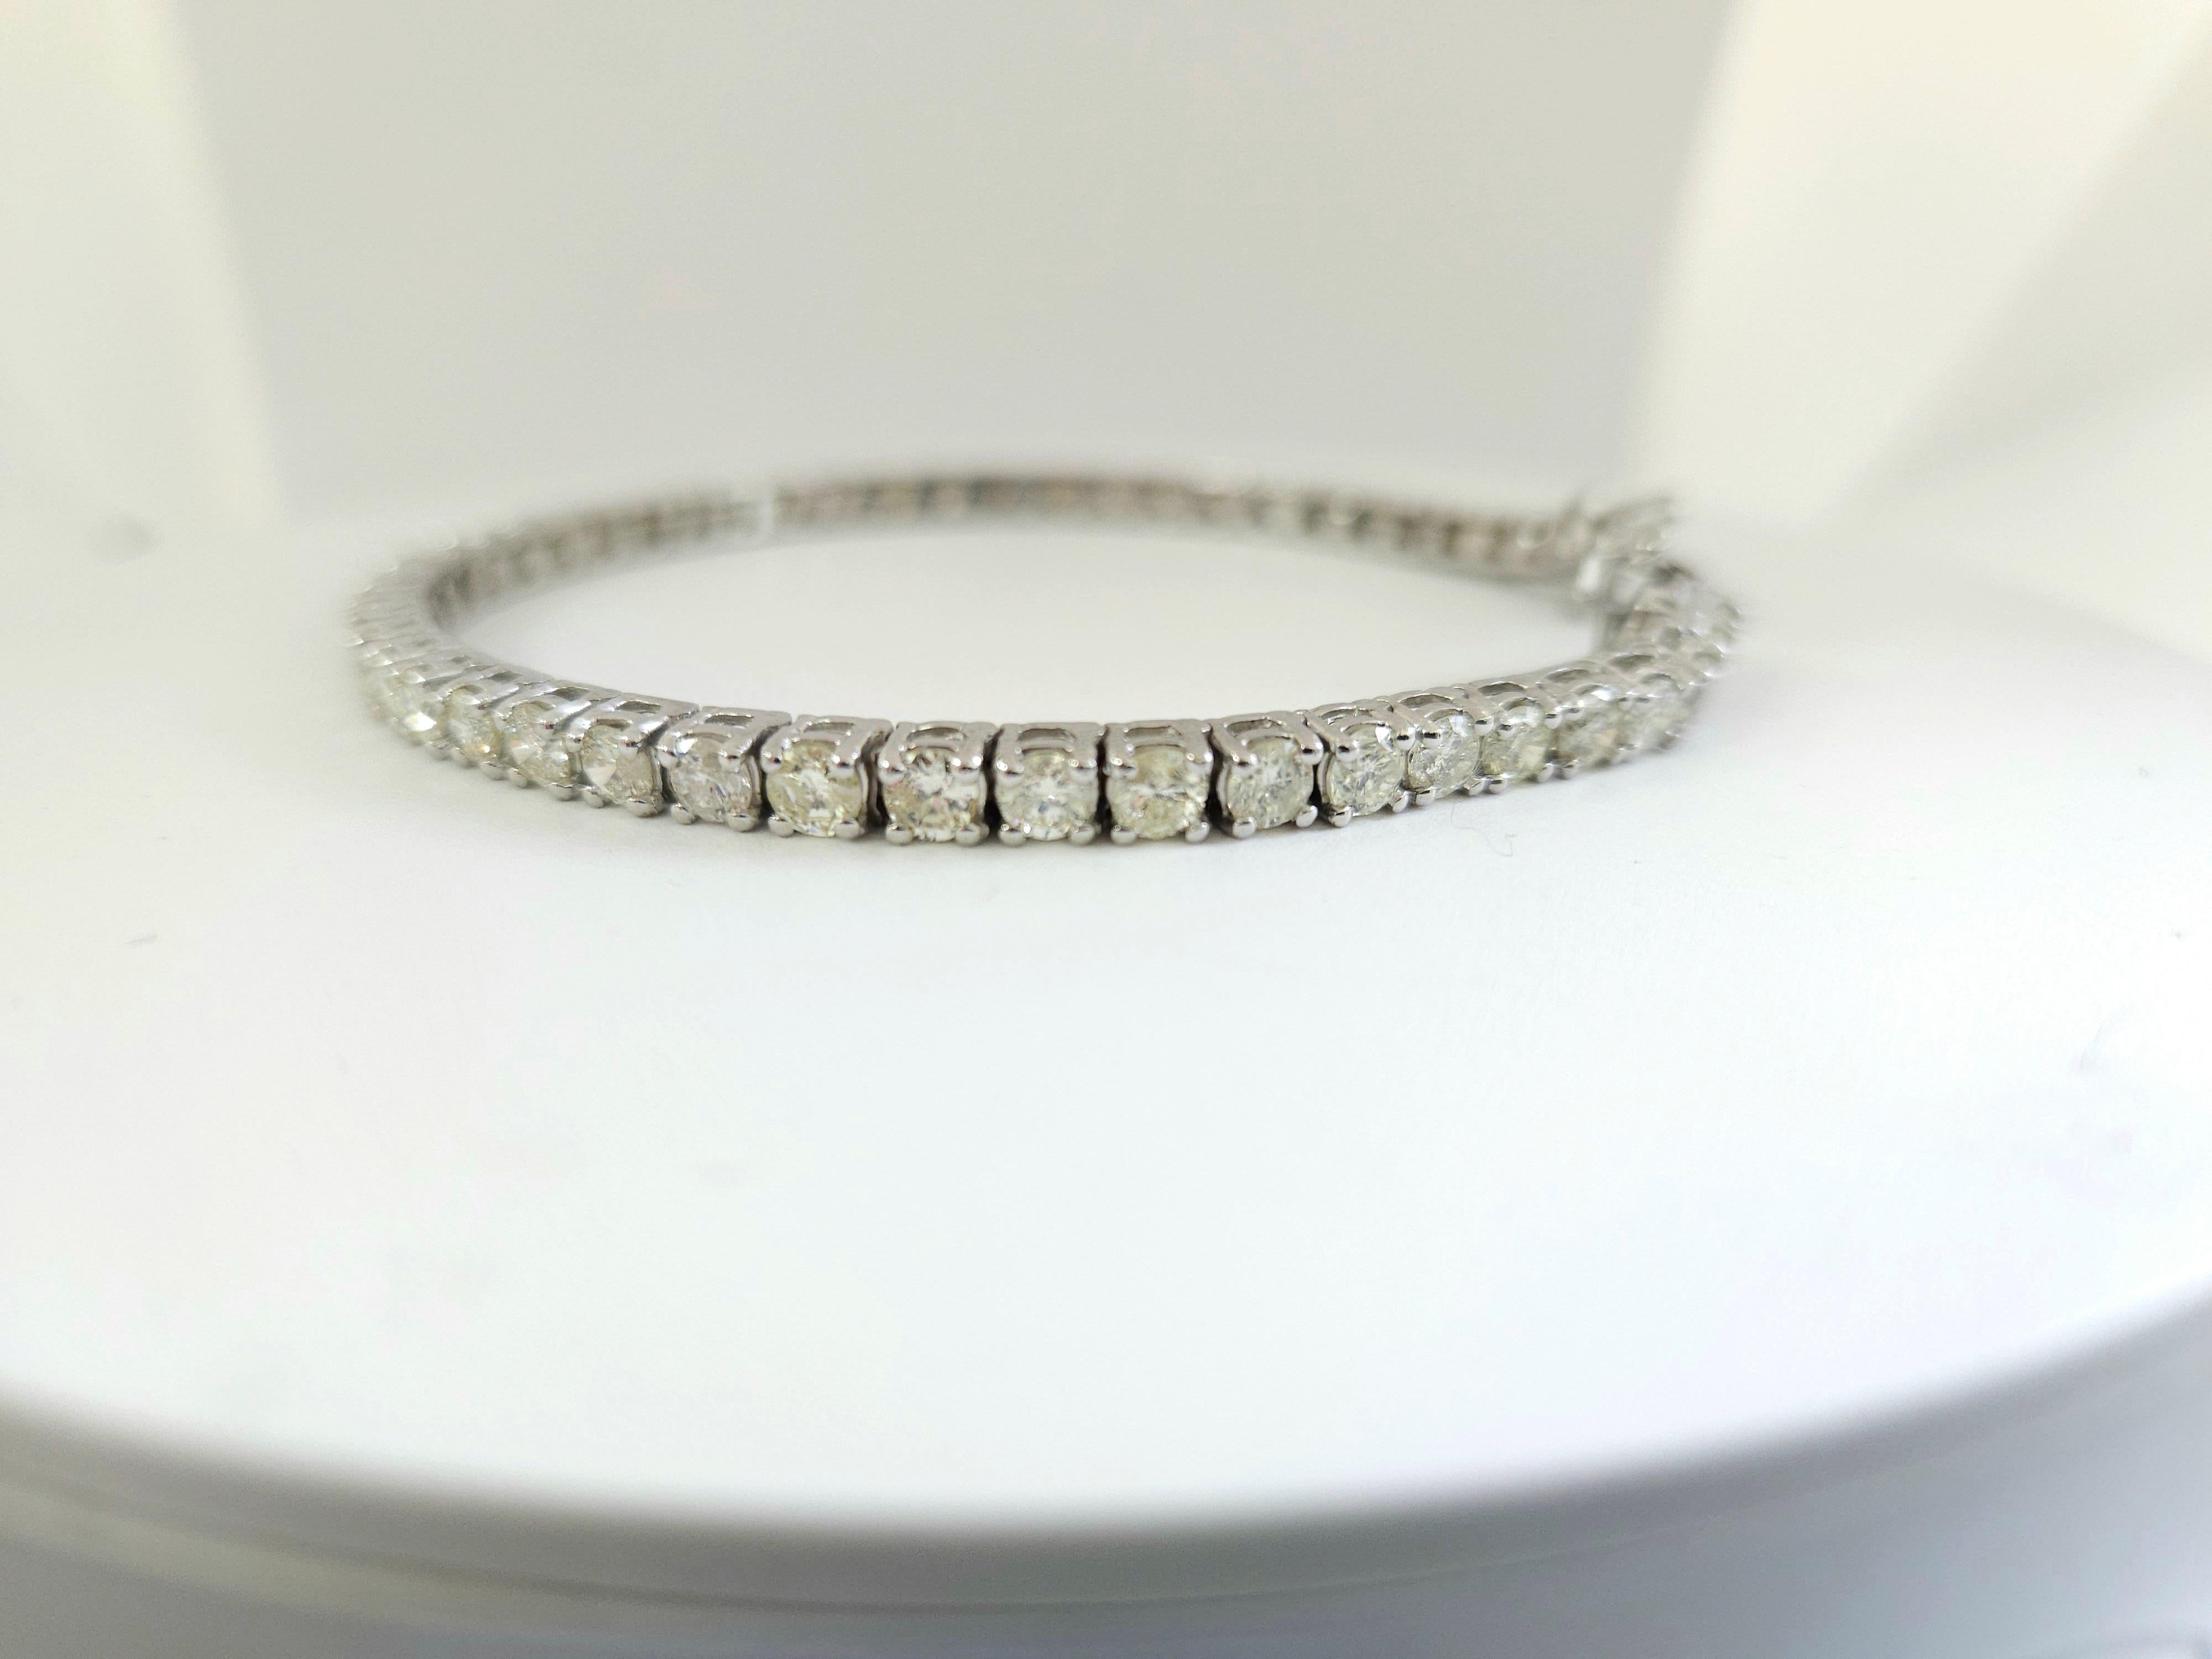 7.50 Carat Round Brilliant Cut Diamond Tennis Bracelet 14 Karat White Gold In New Condition For Sale In Great Neck, NY